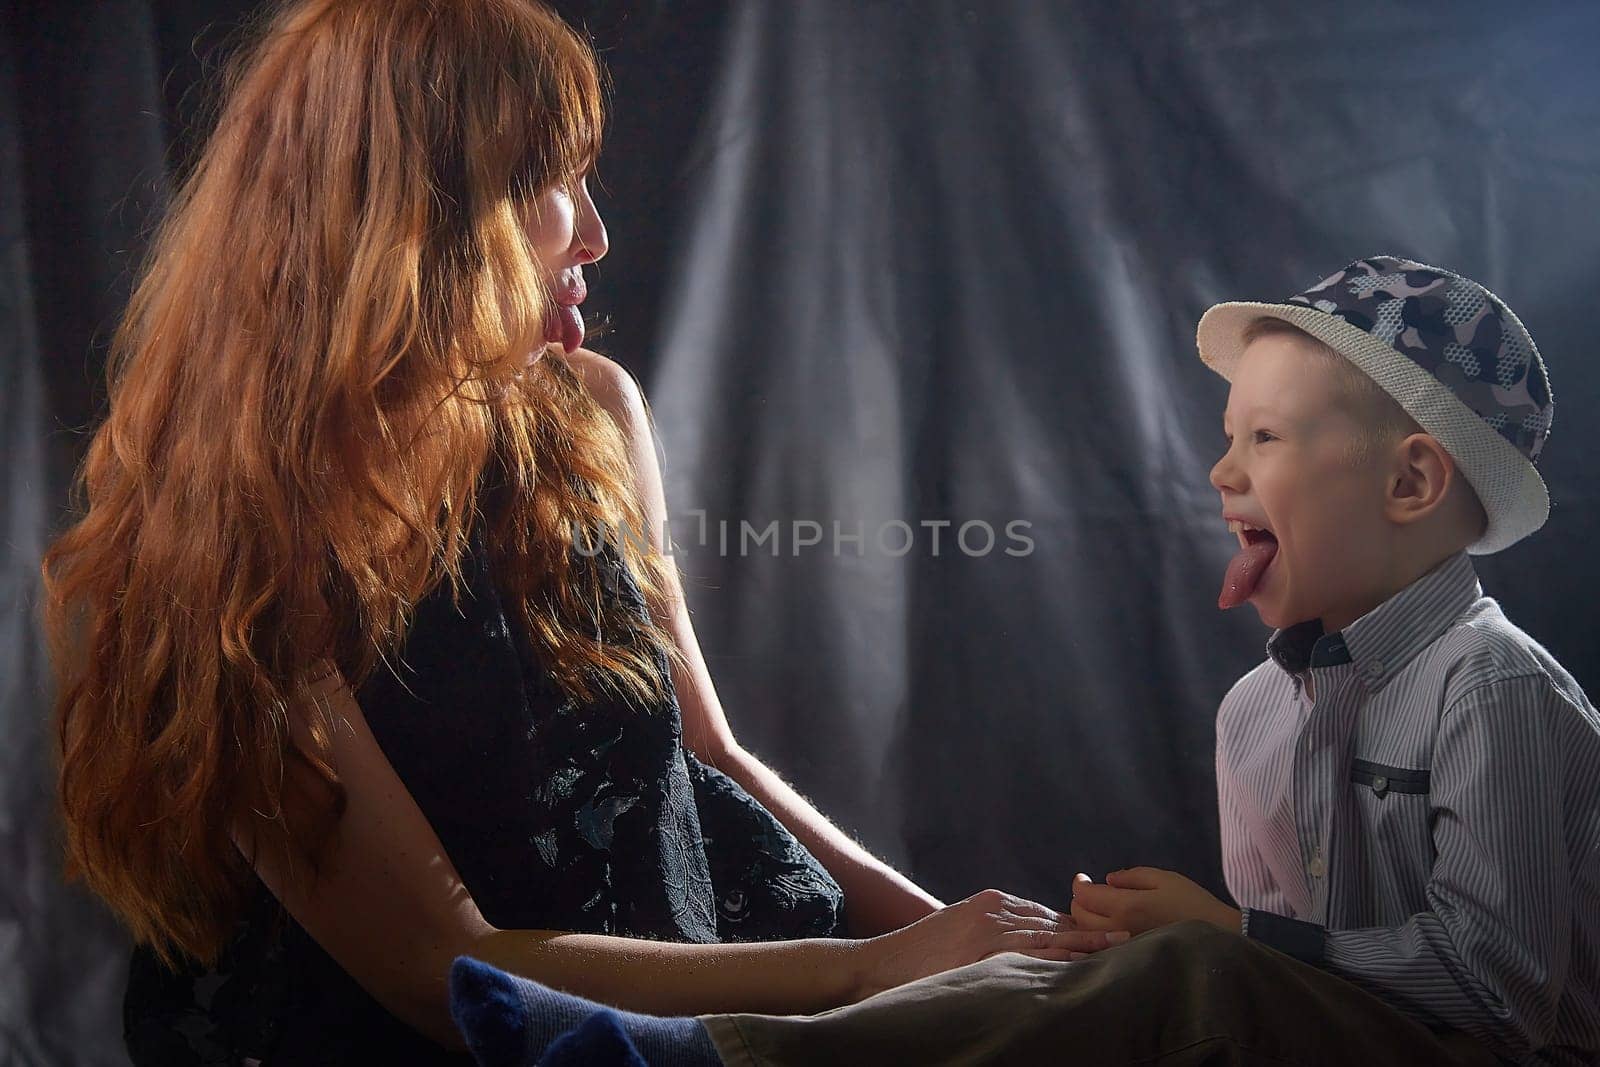 Woman with boy in hat. Mom with son on a dark background. Family portrait with mother with red hair and boy having fun together